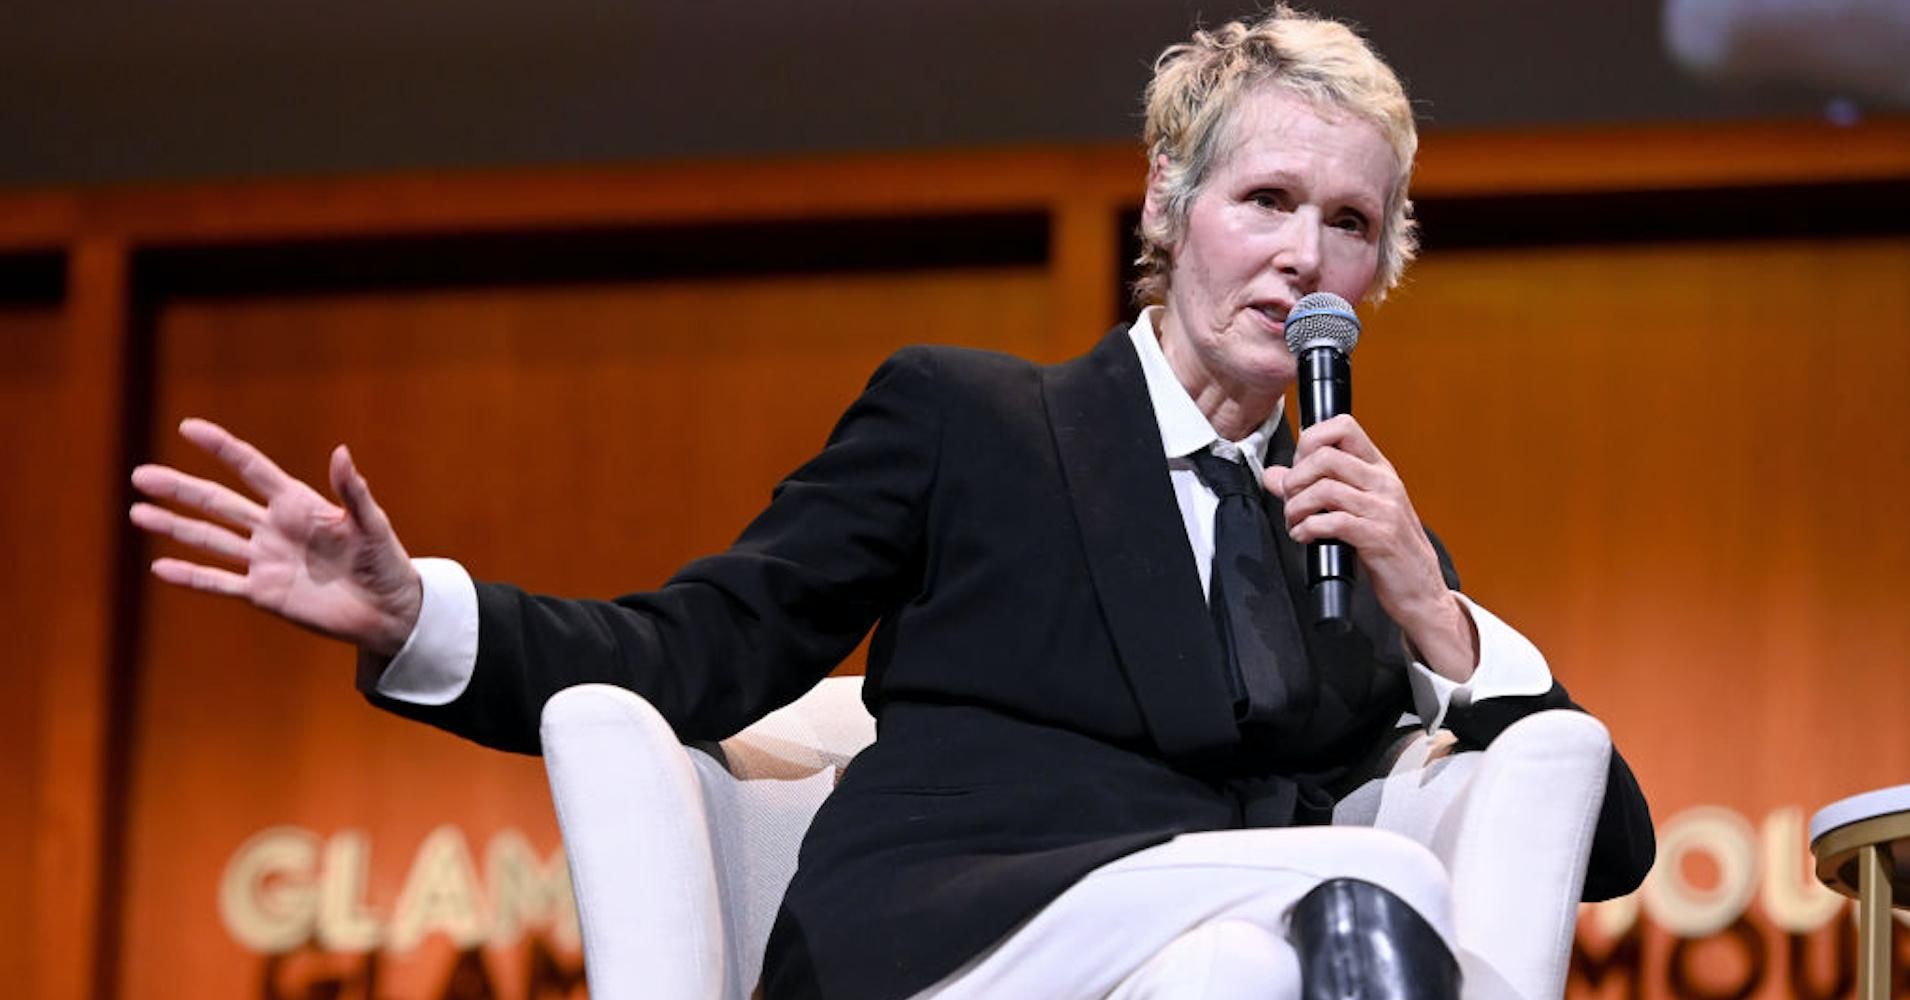 E. Jean Carroll speaks during the 2019 Glamour Women of the Year summit in New York City. (Photo: Ilya S. Savenok/Getty Images for Glamour) 